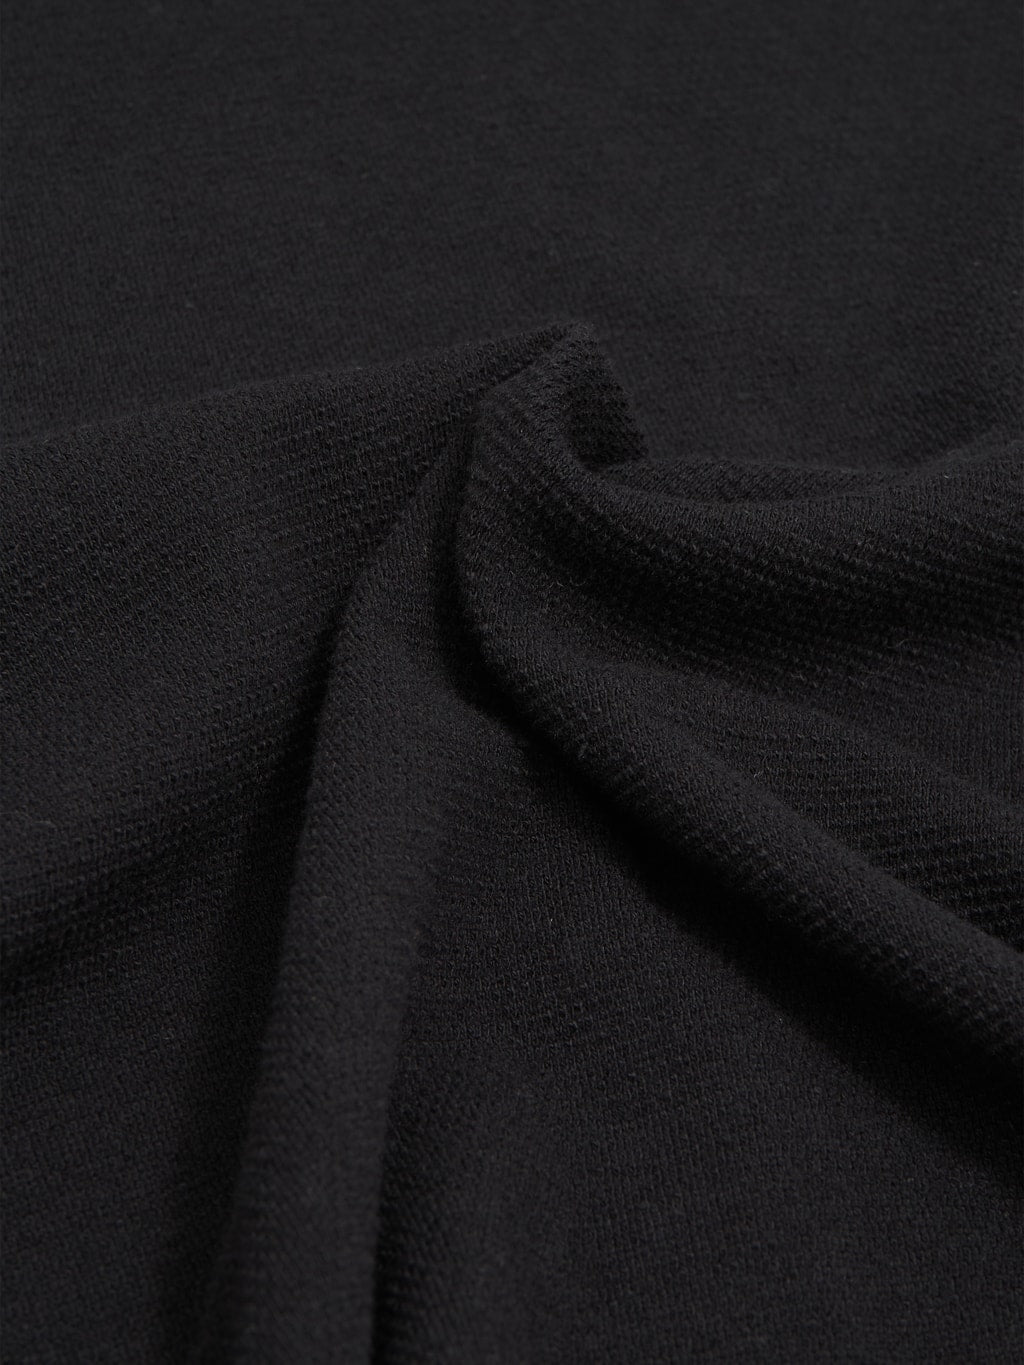 Trophy Clothing Utility Mil Tee black texture